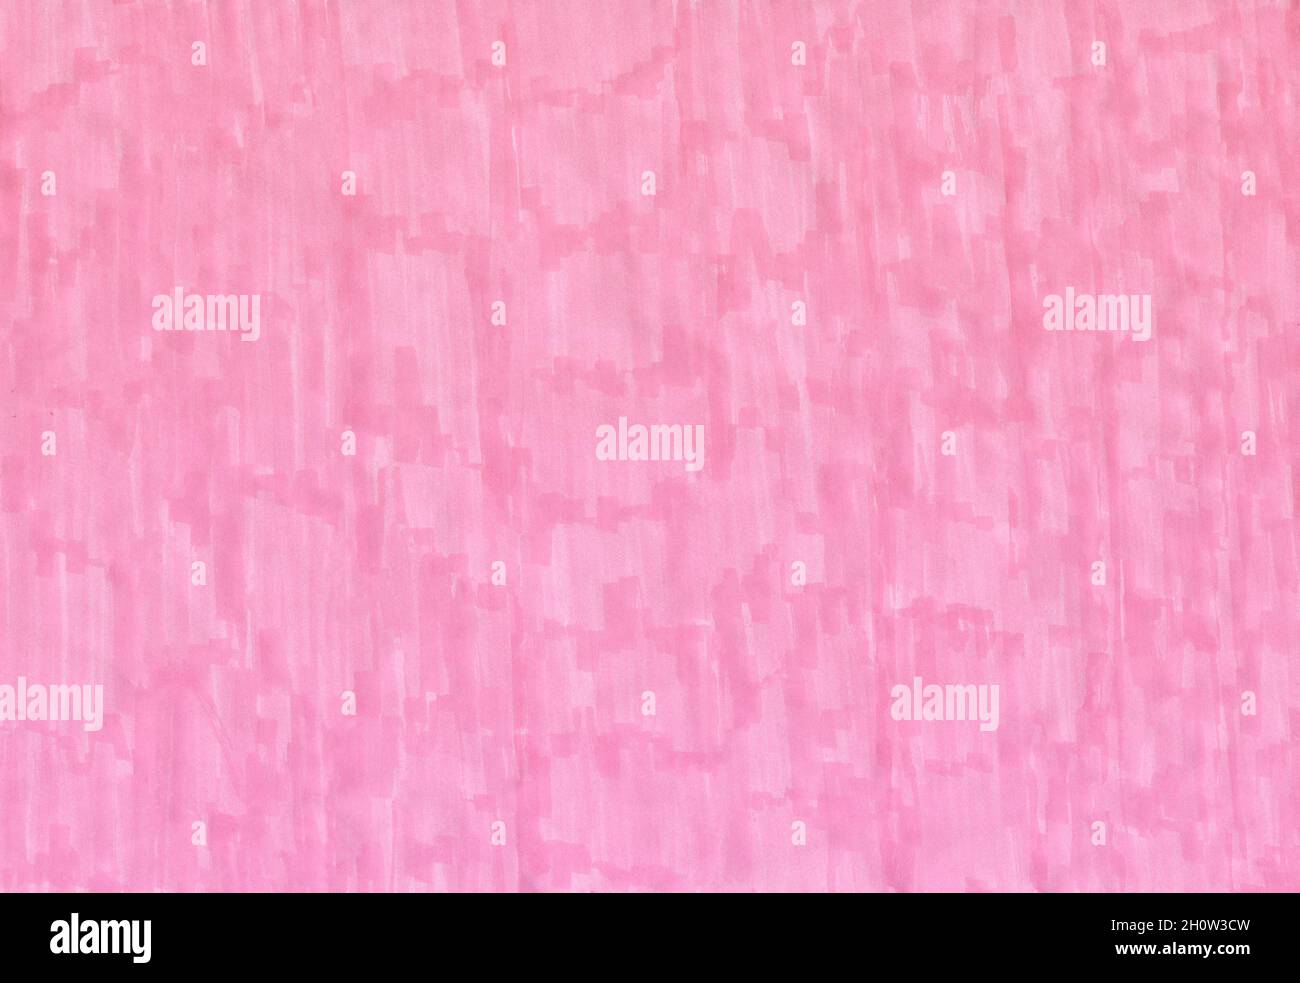 Pink wax crayon scribble background. Pink crayons texture Stock Photo -  Alamy